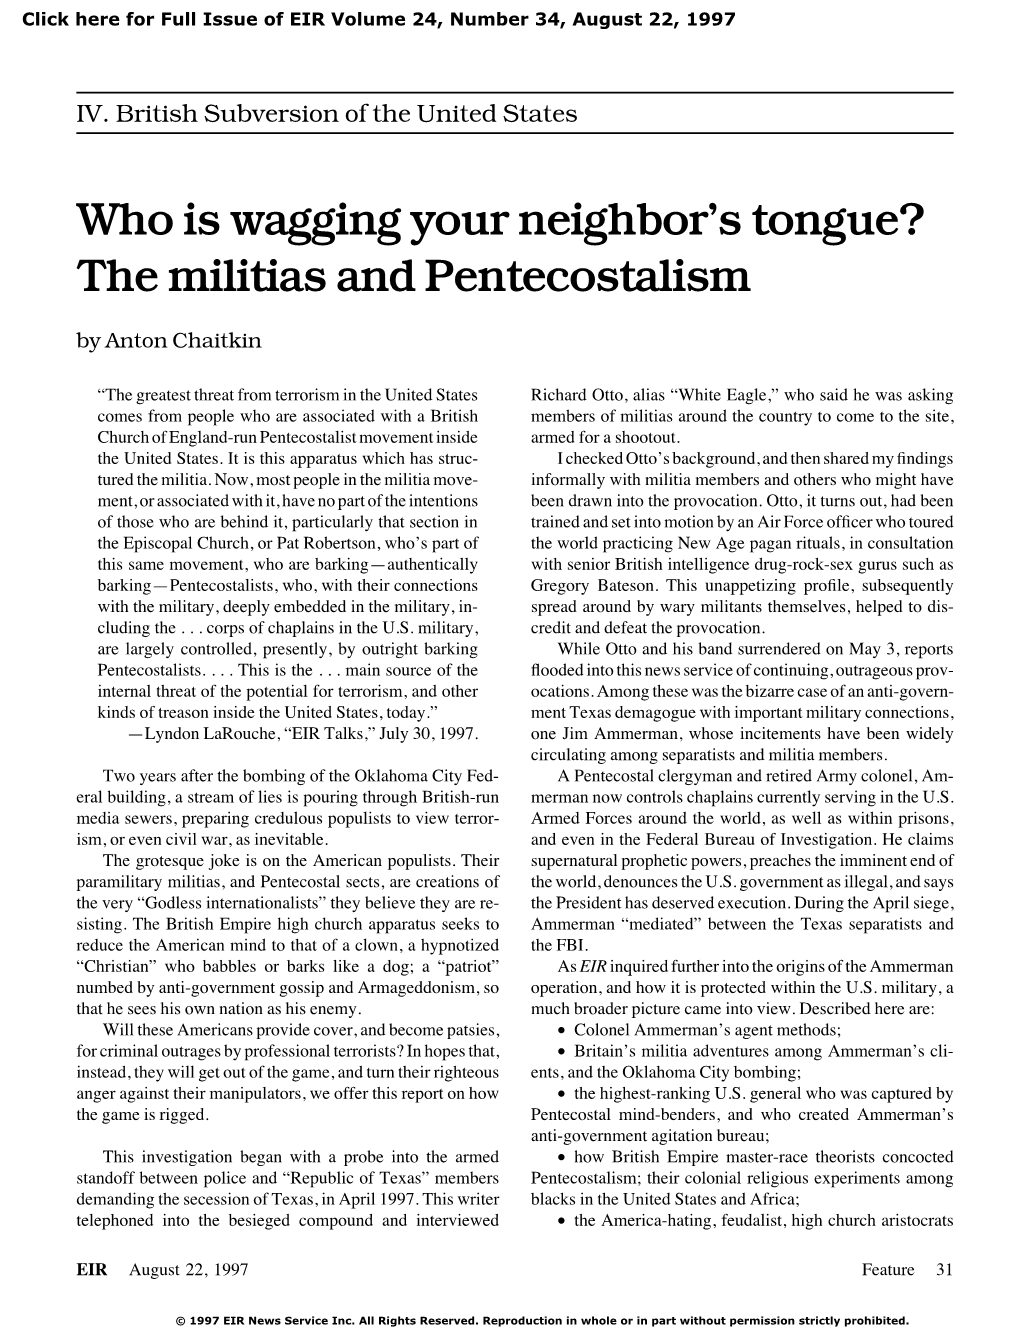 Who Is Wagging Your Neighbor's Tongue?